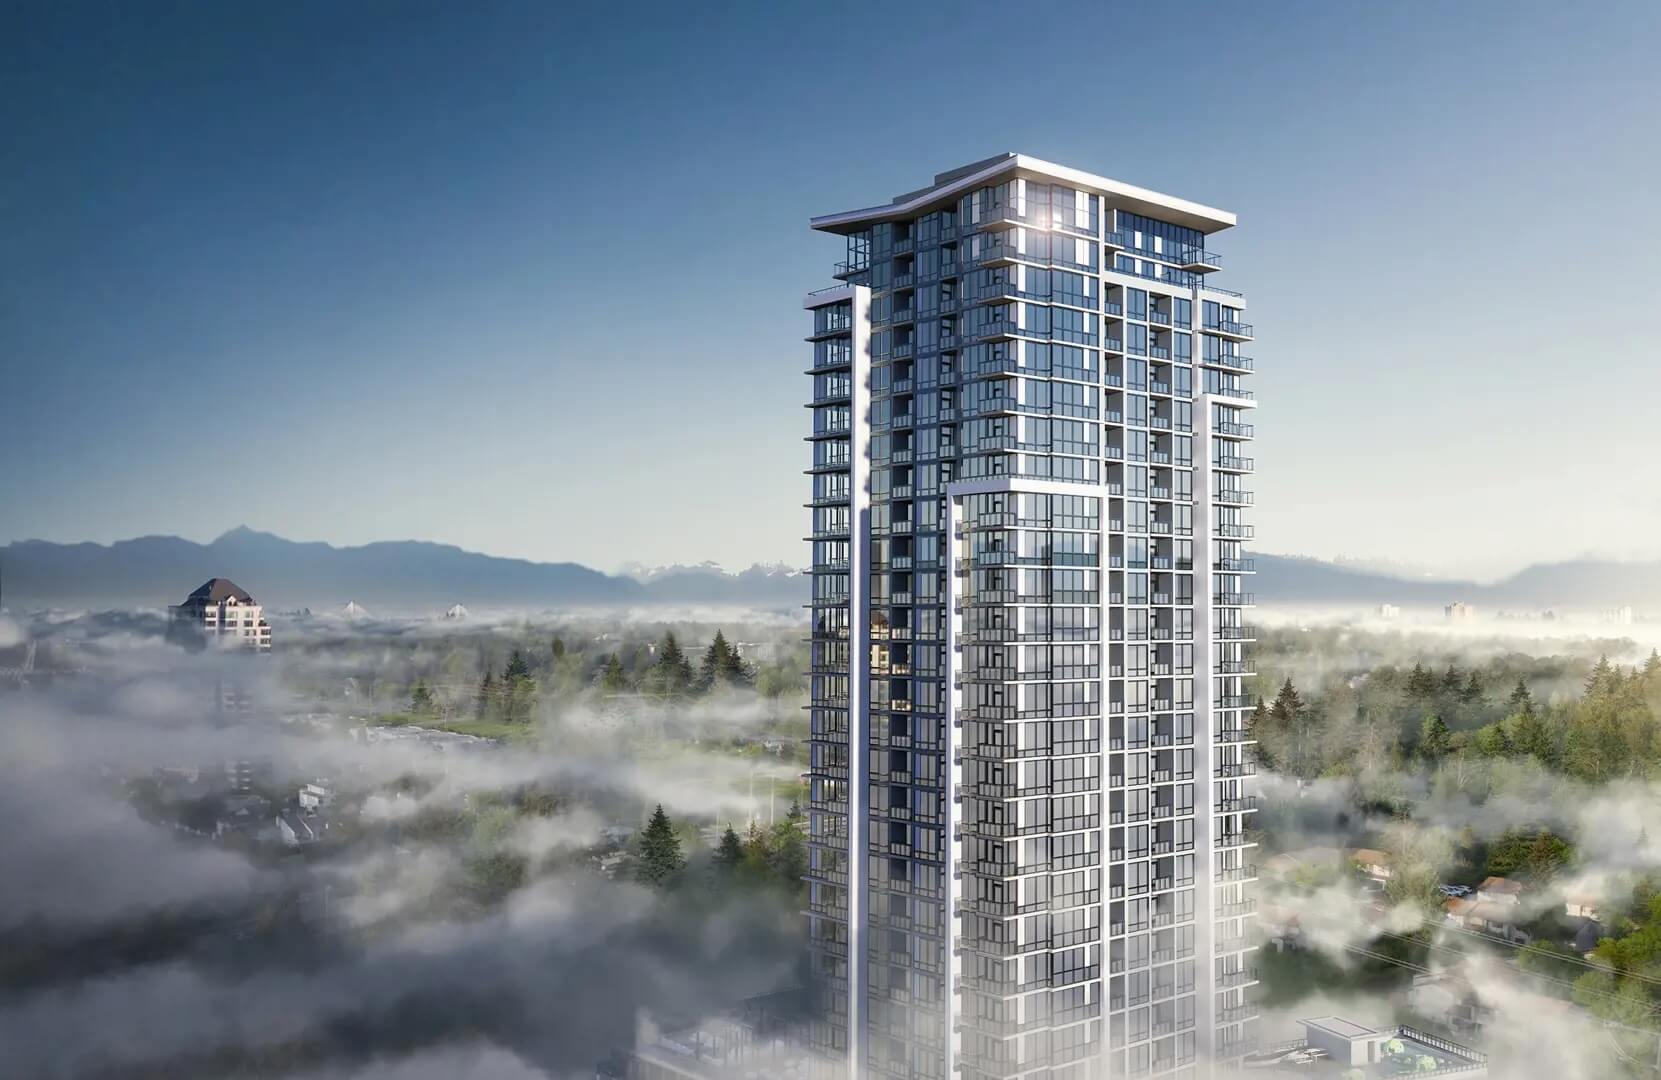 SkyLiving Surrey - a City Centre residential development of condos and townhomes.